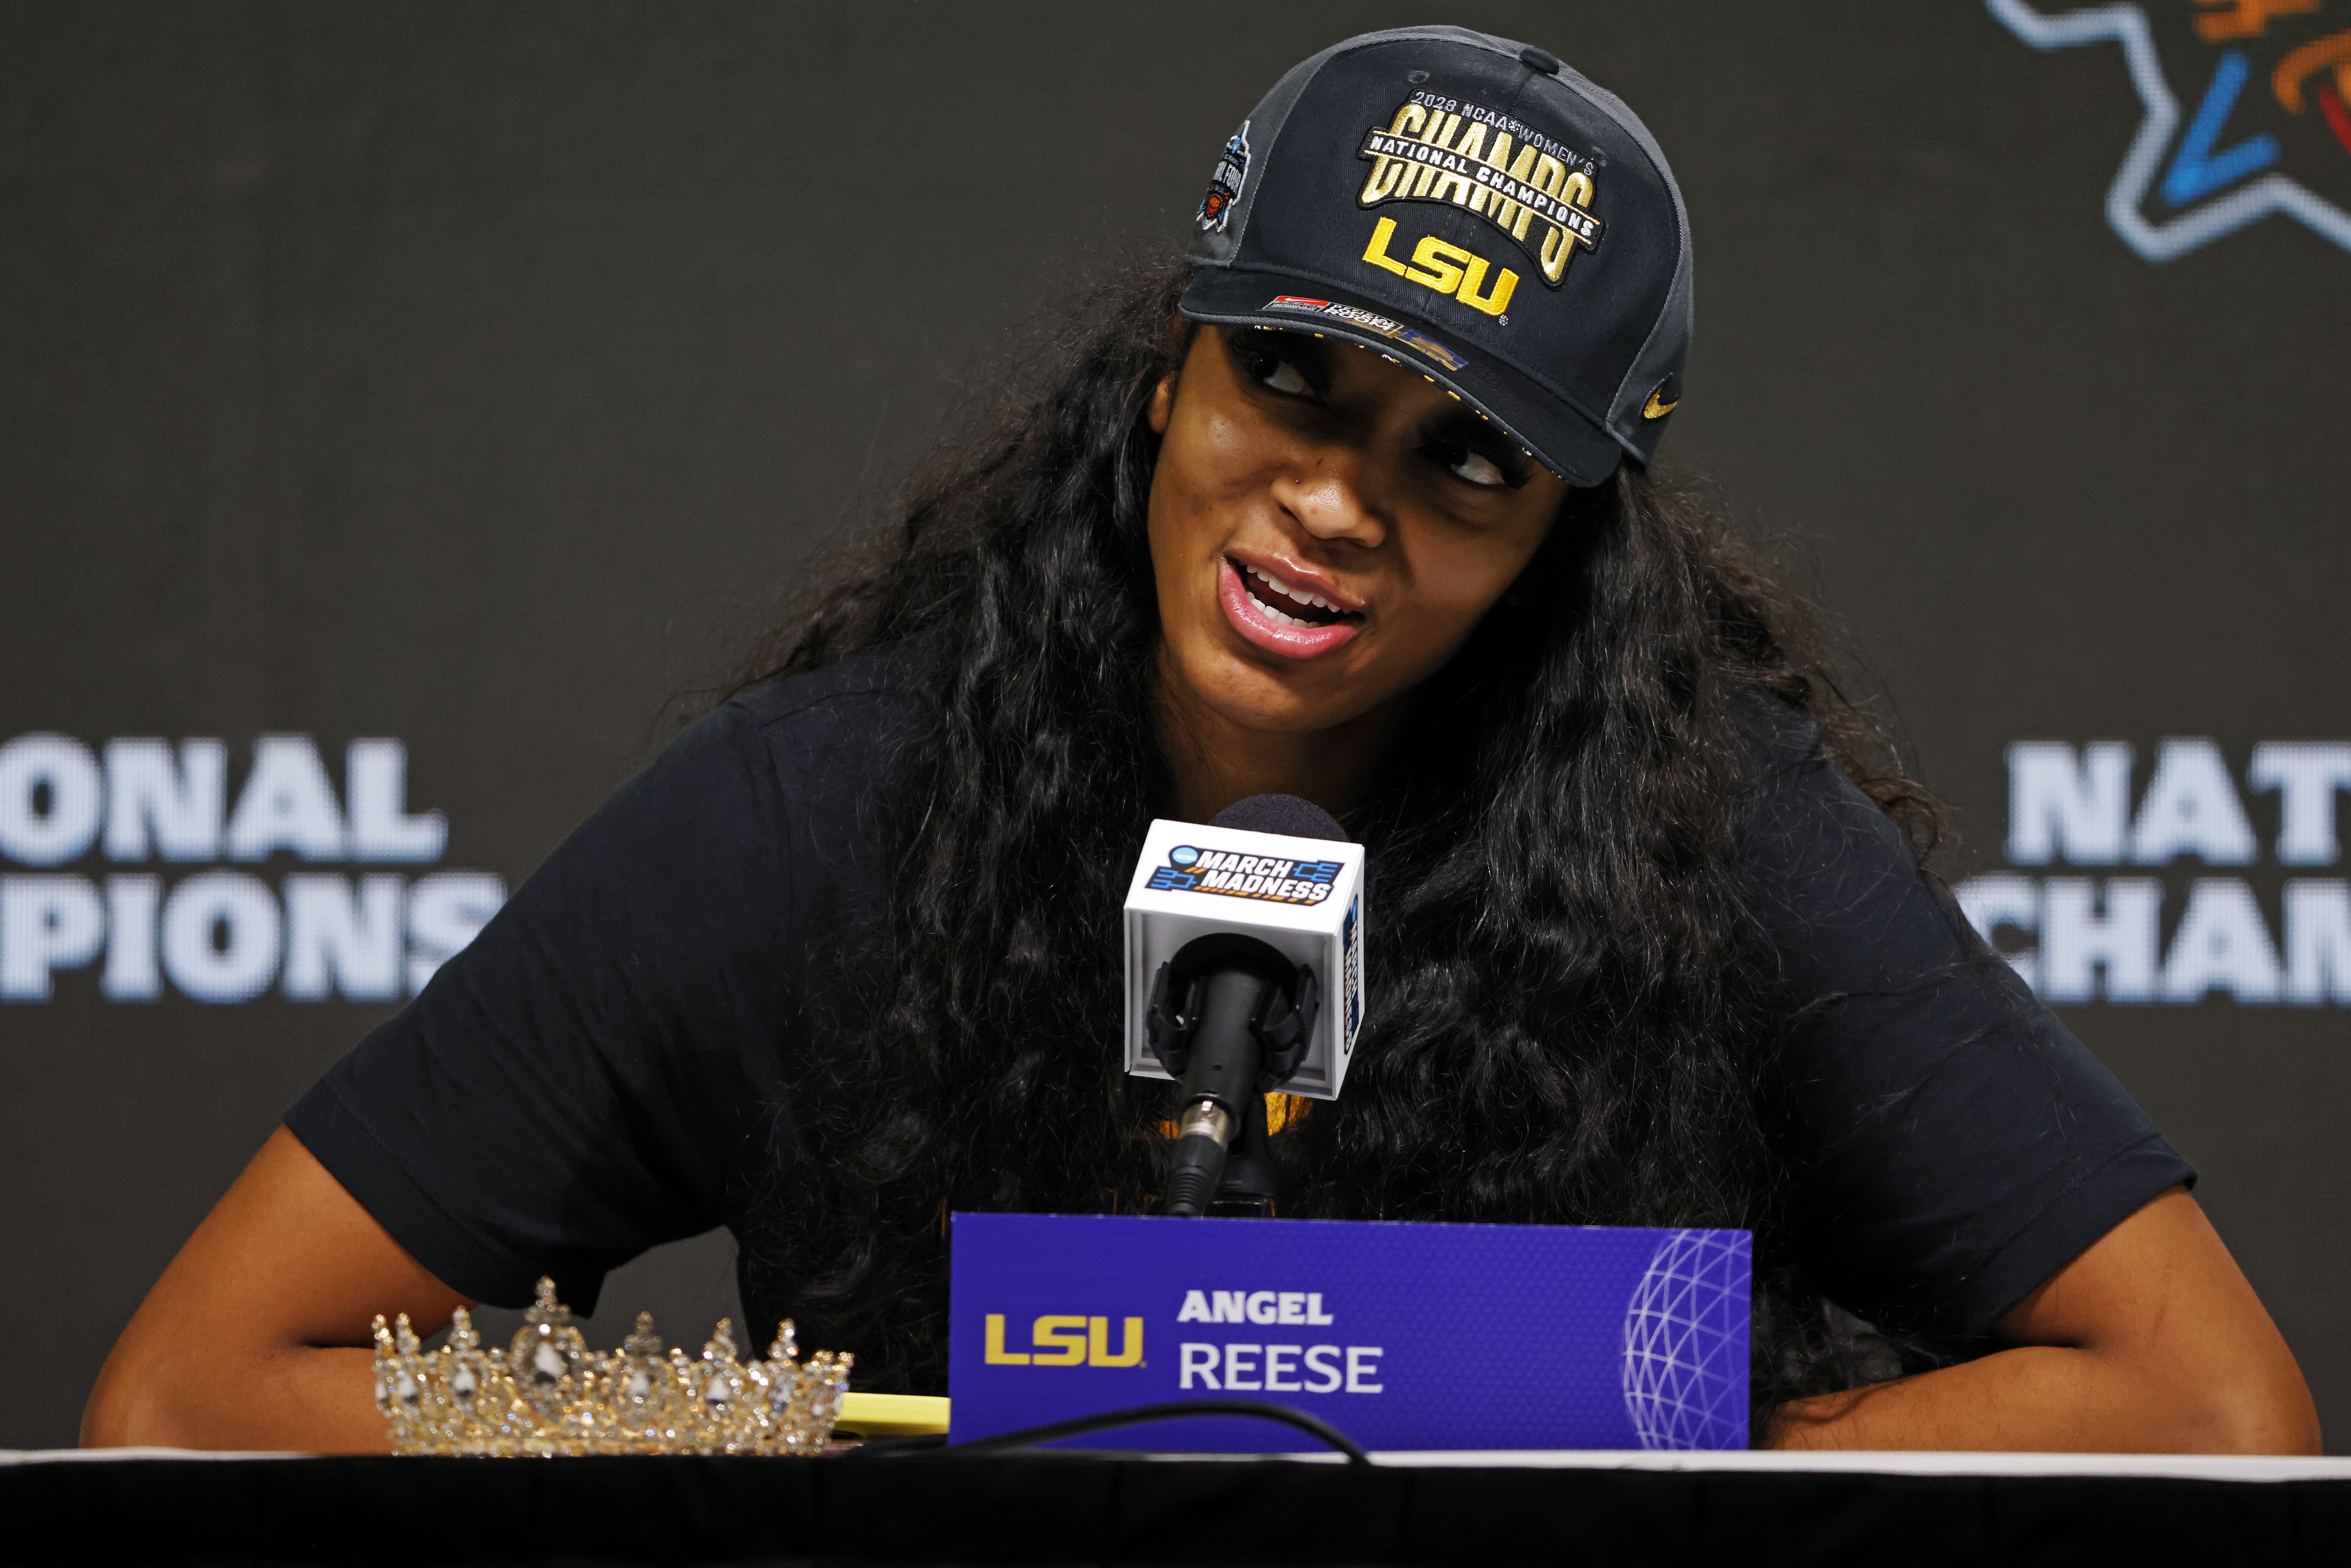 Angel Reese received an elite Old Bay care package after LSU’s national championship win